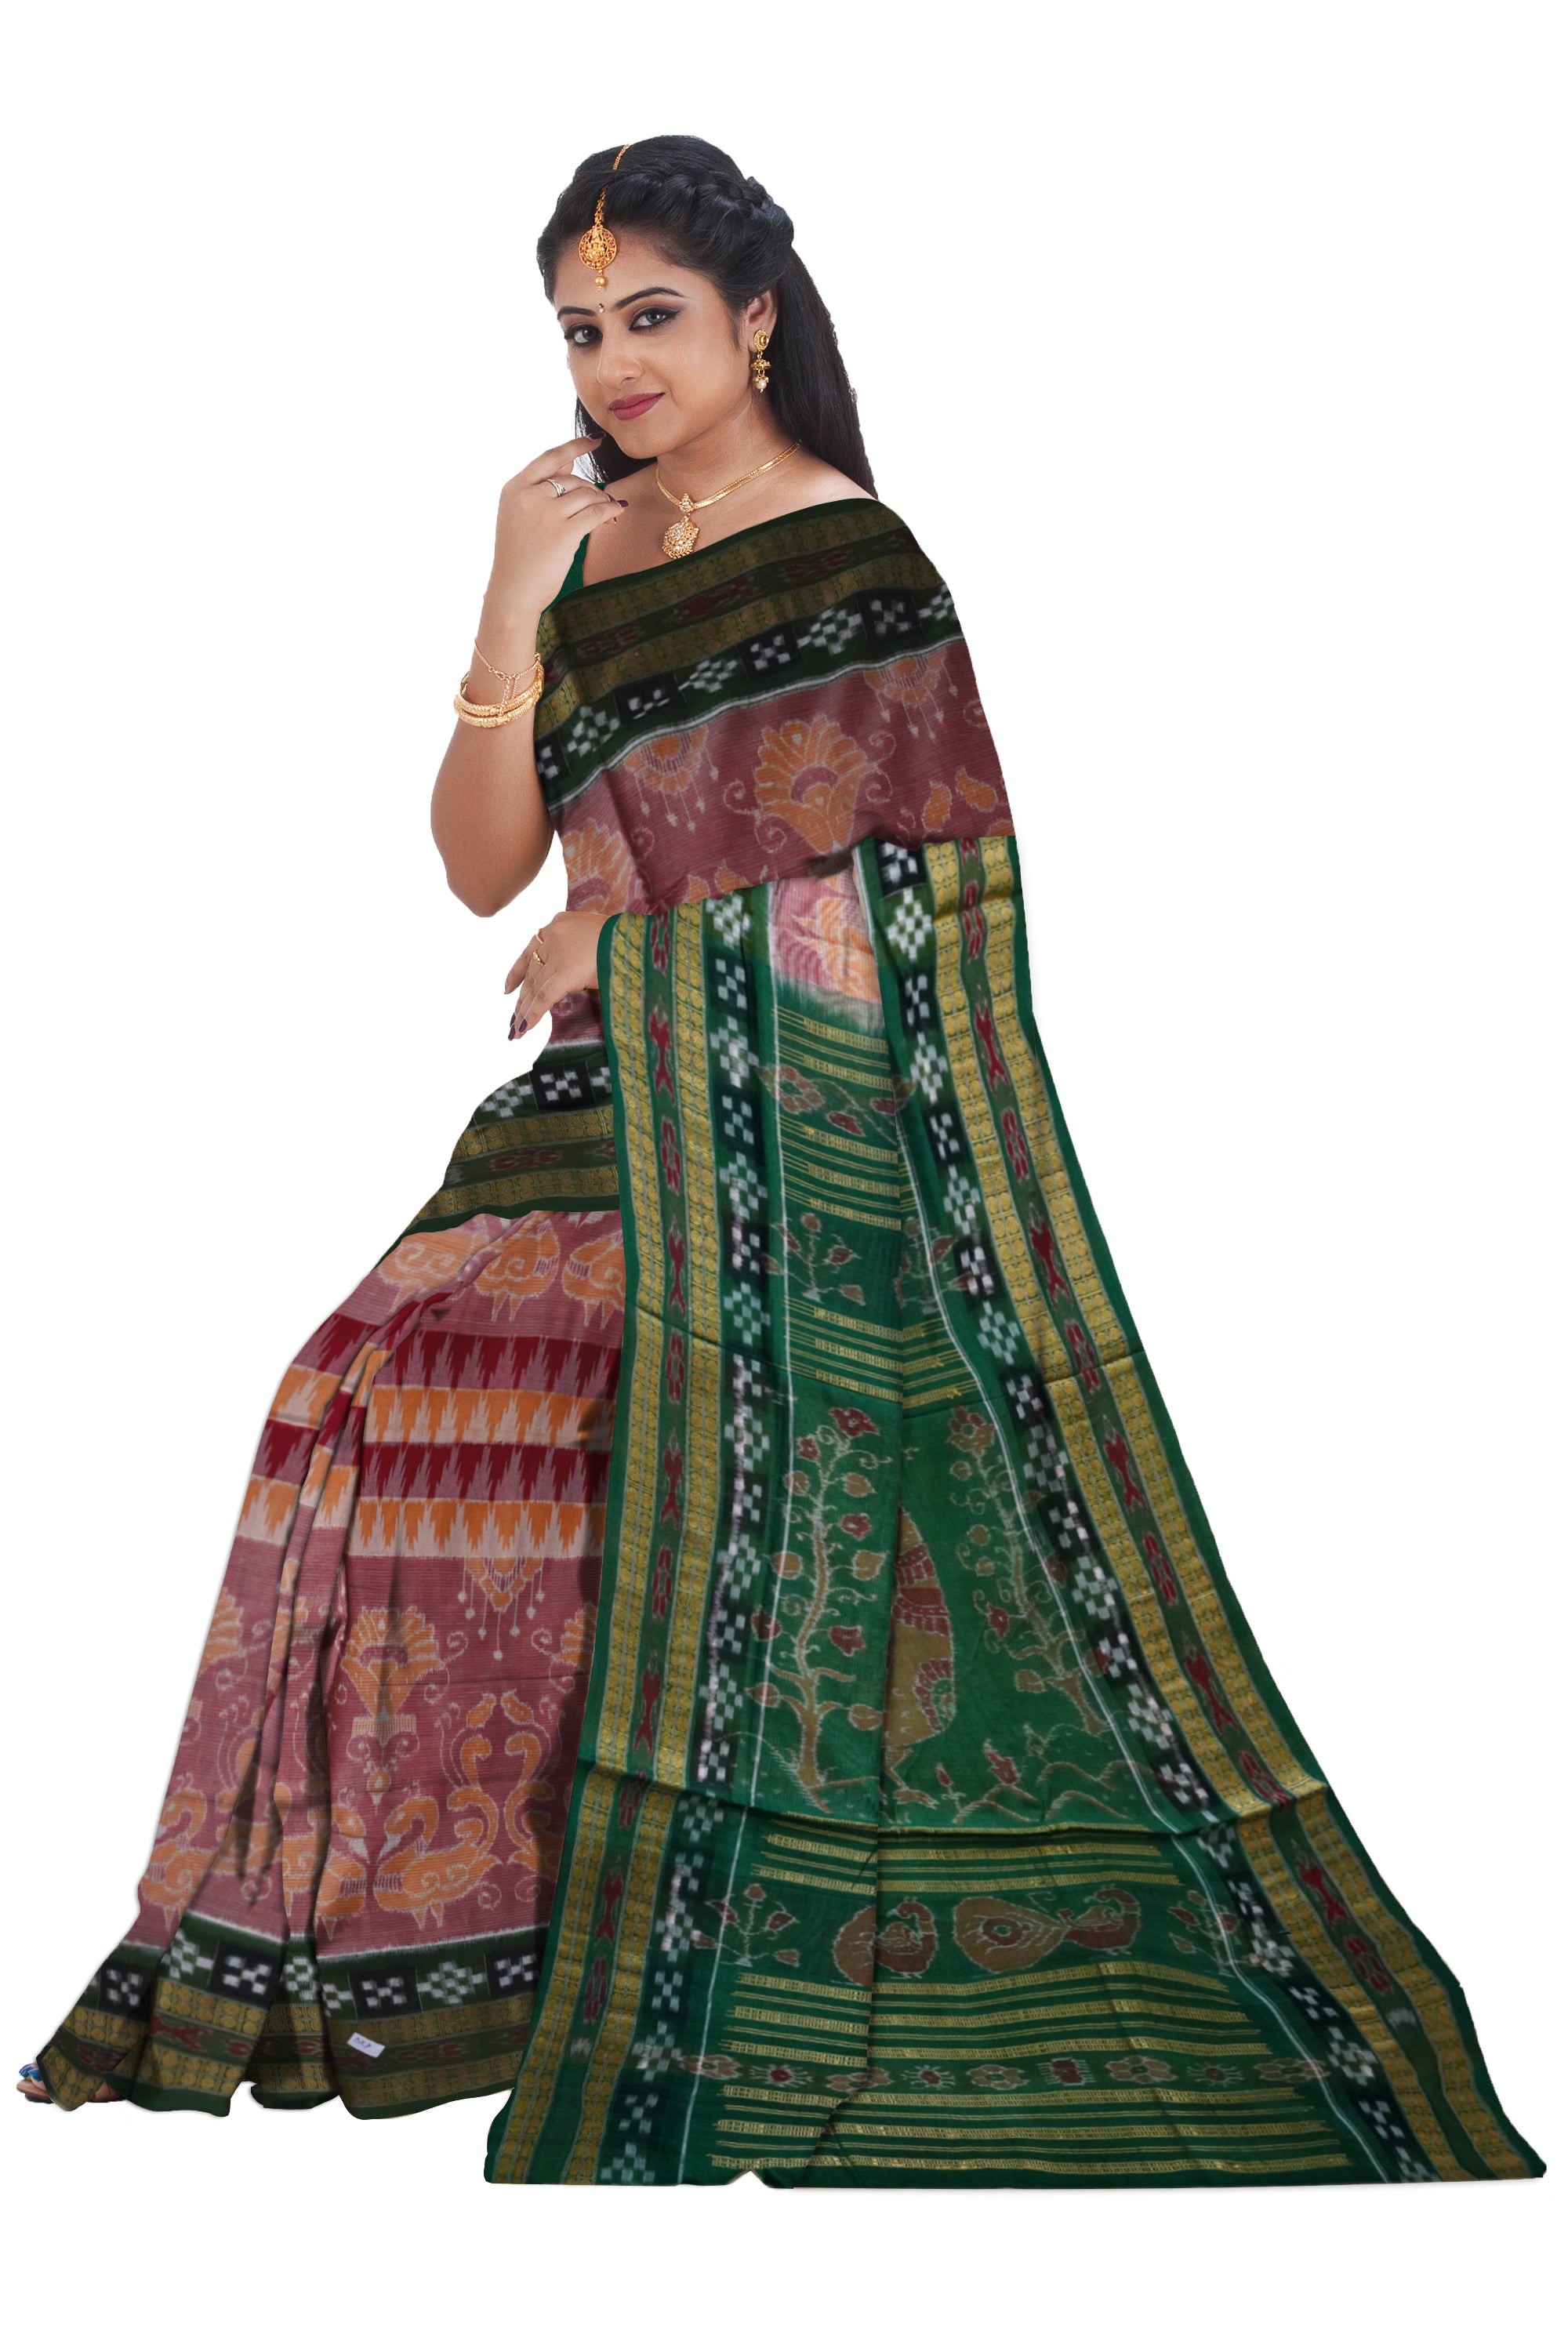 Peacock with pasapali pattern pure cotton saree is baby pink and green color base. - Koshali Arts & Crafts Enterprise